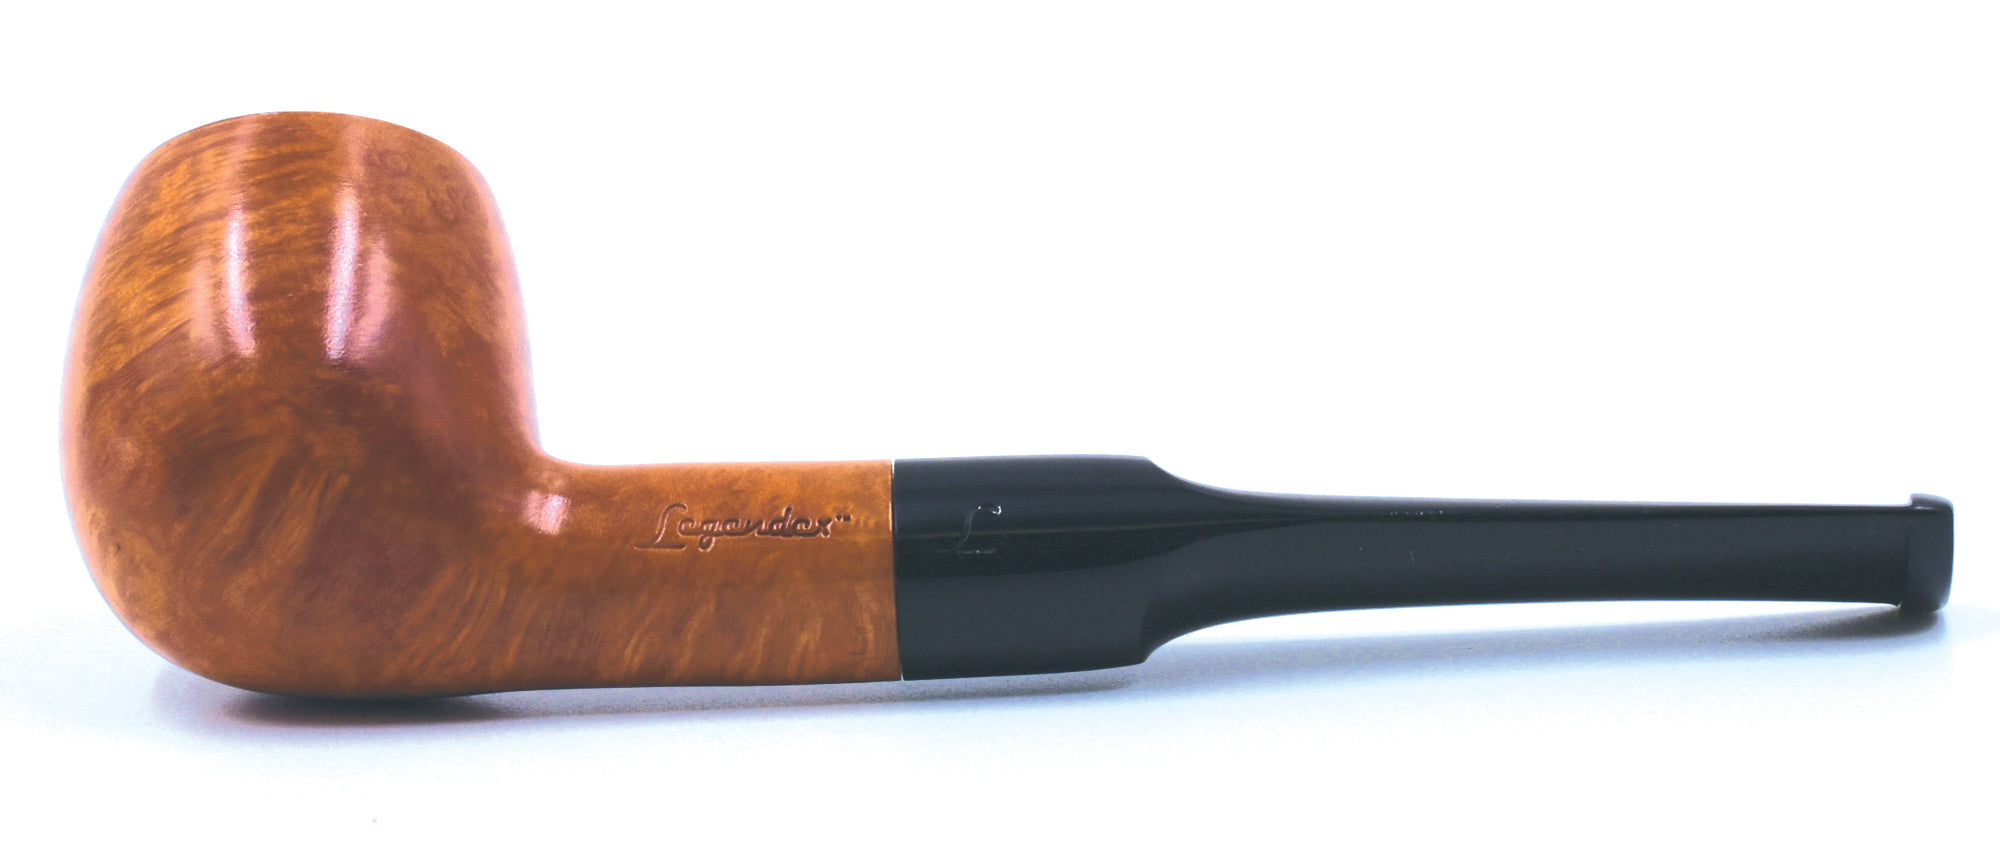 LEGENDEX® SCALADI* 6 MM Filtered Briar Smoking Pipe Made In Italy 01-08-118